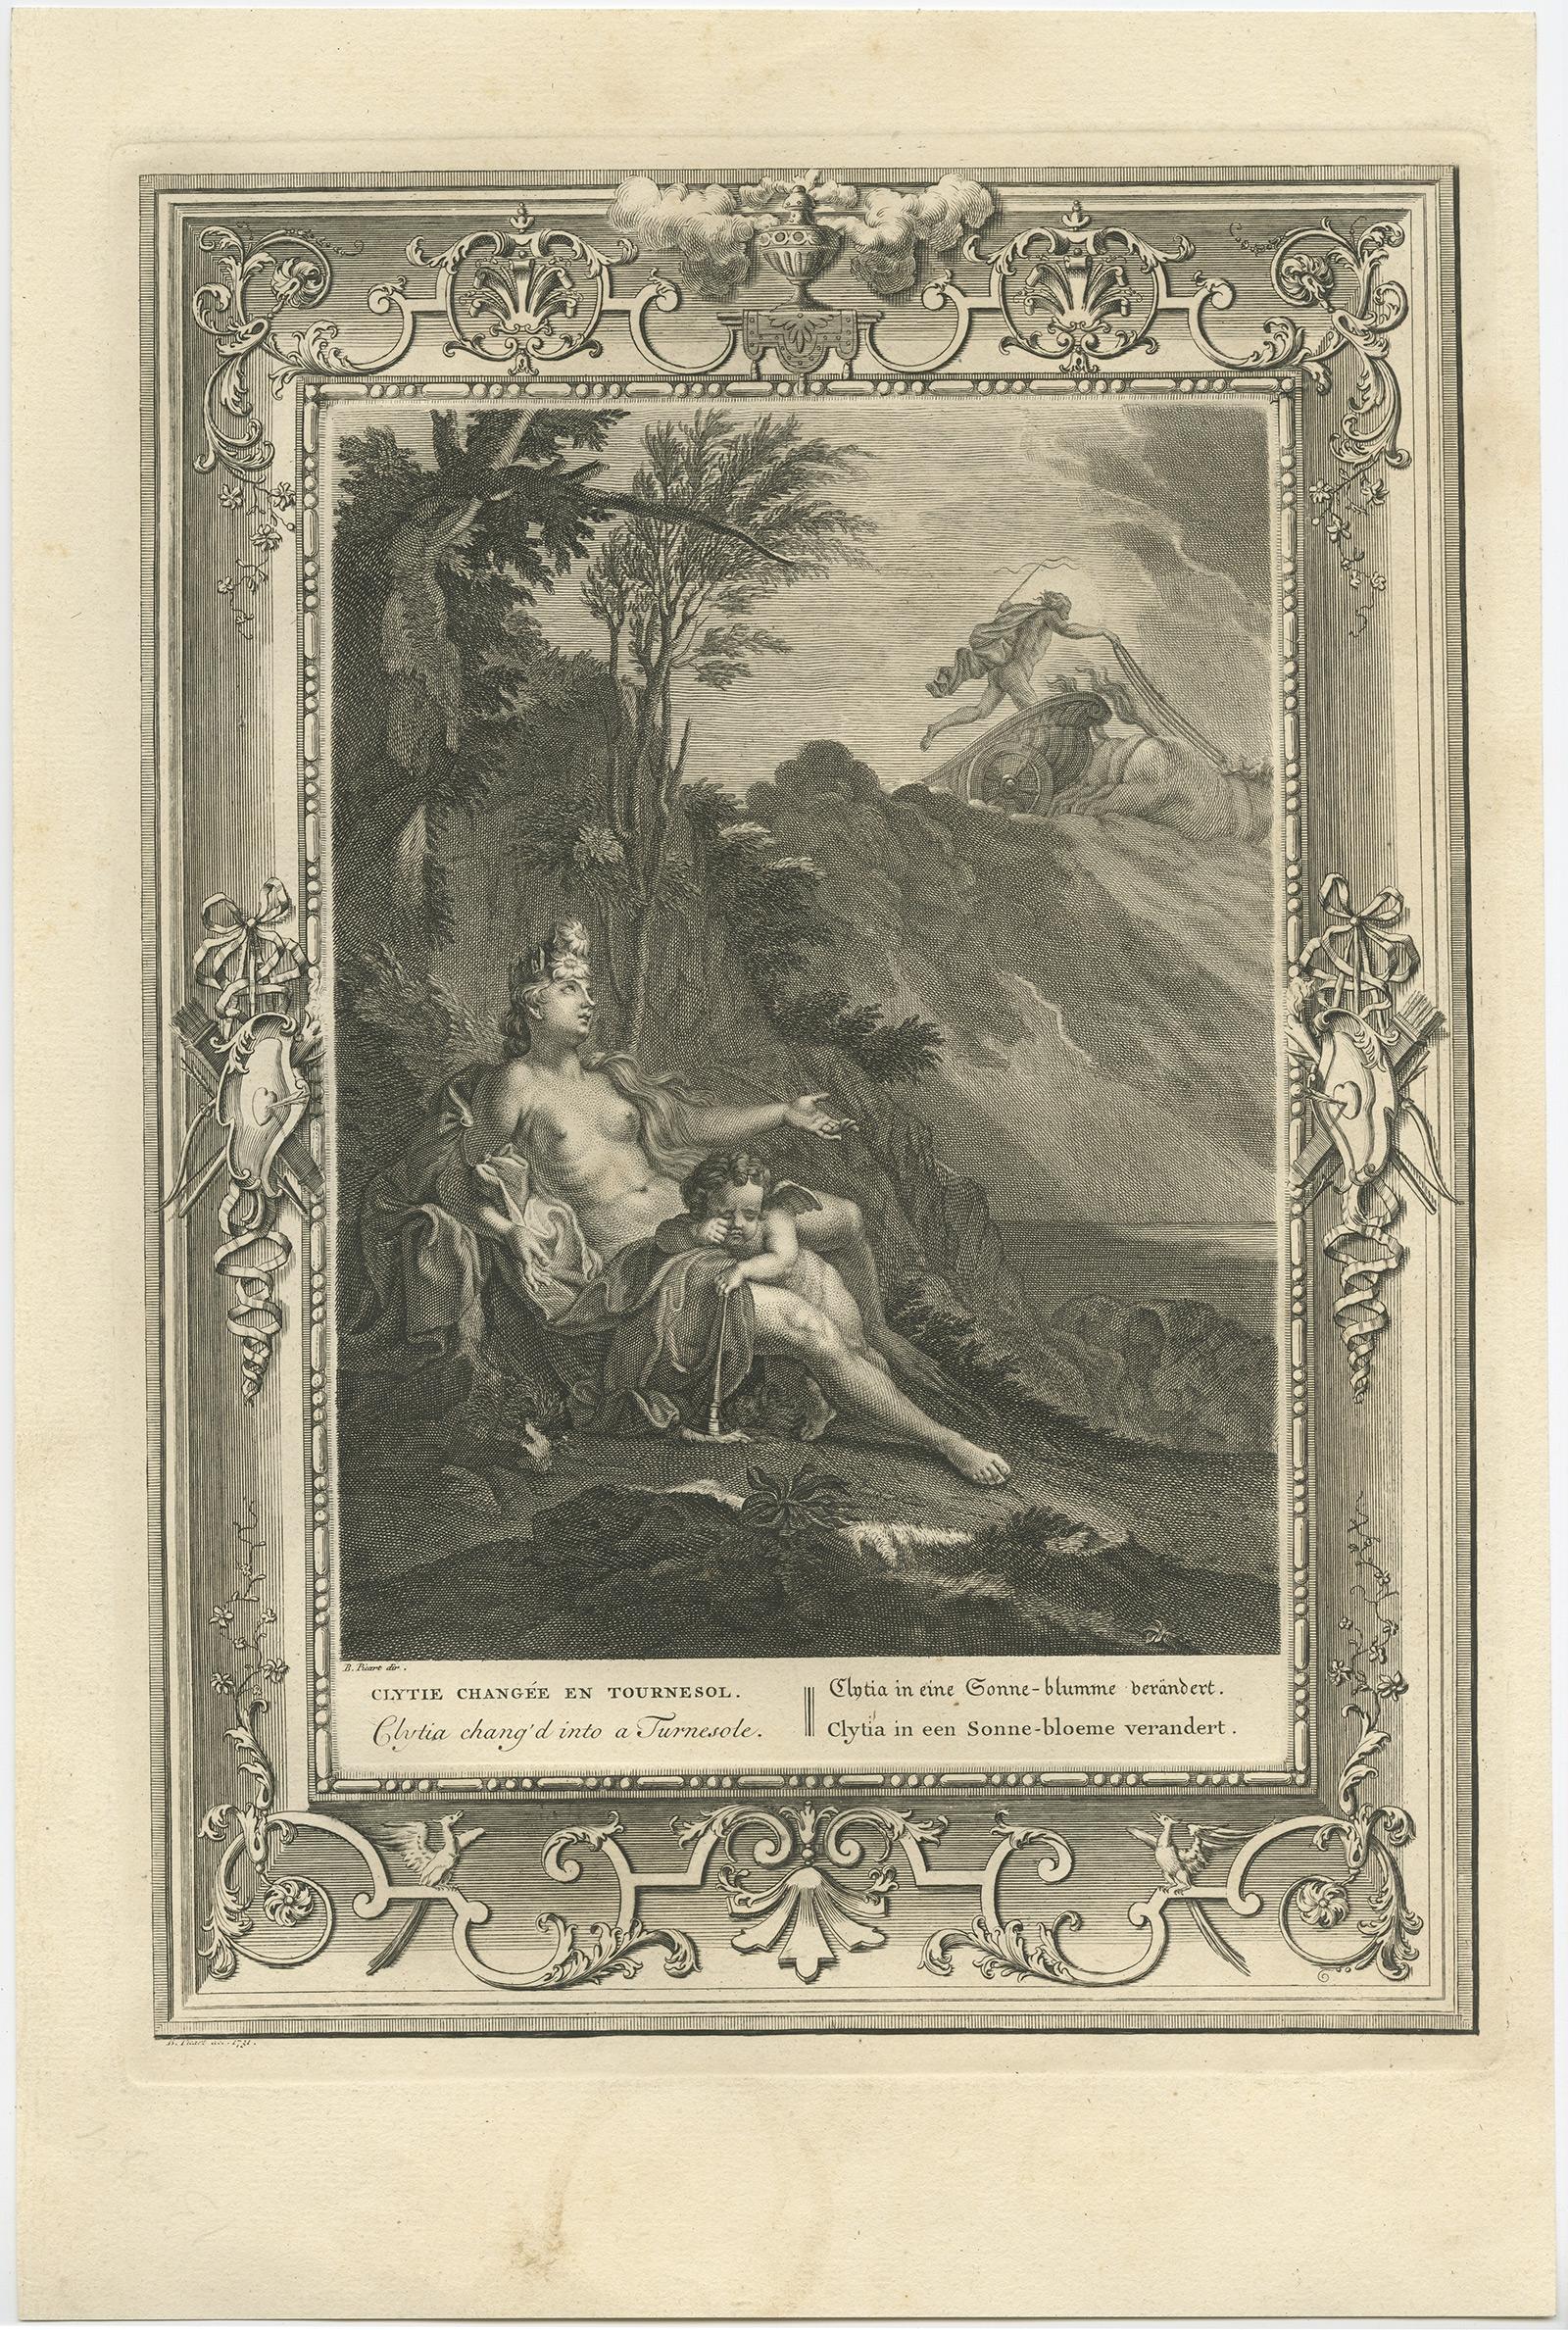 Antique print titled 'Clytie changée en Tournesol (..)'. 

This print depicts Clytia turning into a sunflower. Clytia (or Clytie) was a water nymph, daughter of Oceanus and Tethys in Greek mythology. She was loved by Apollo / Helios. After losing